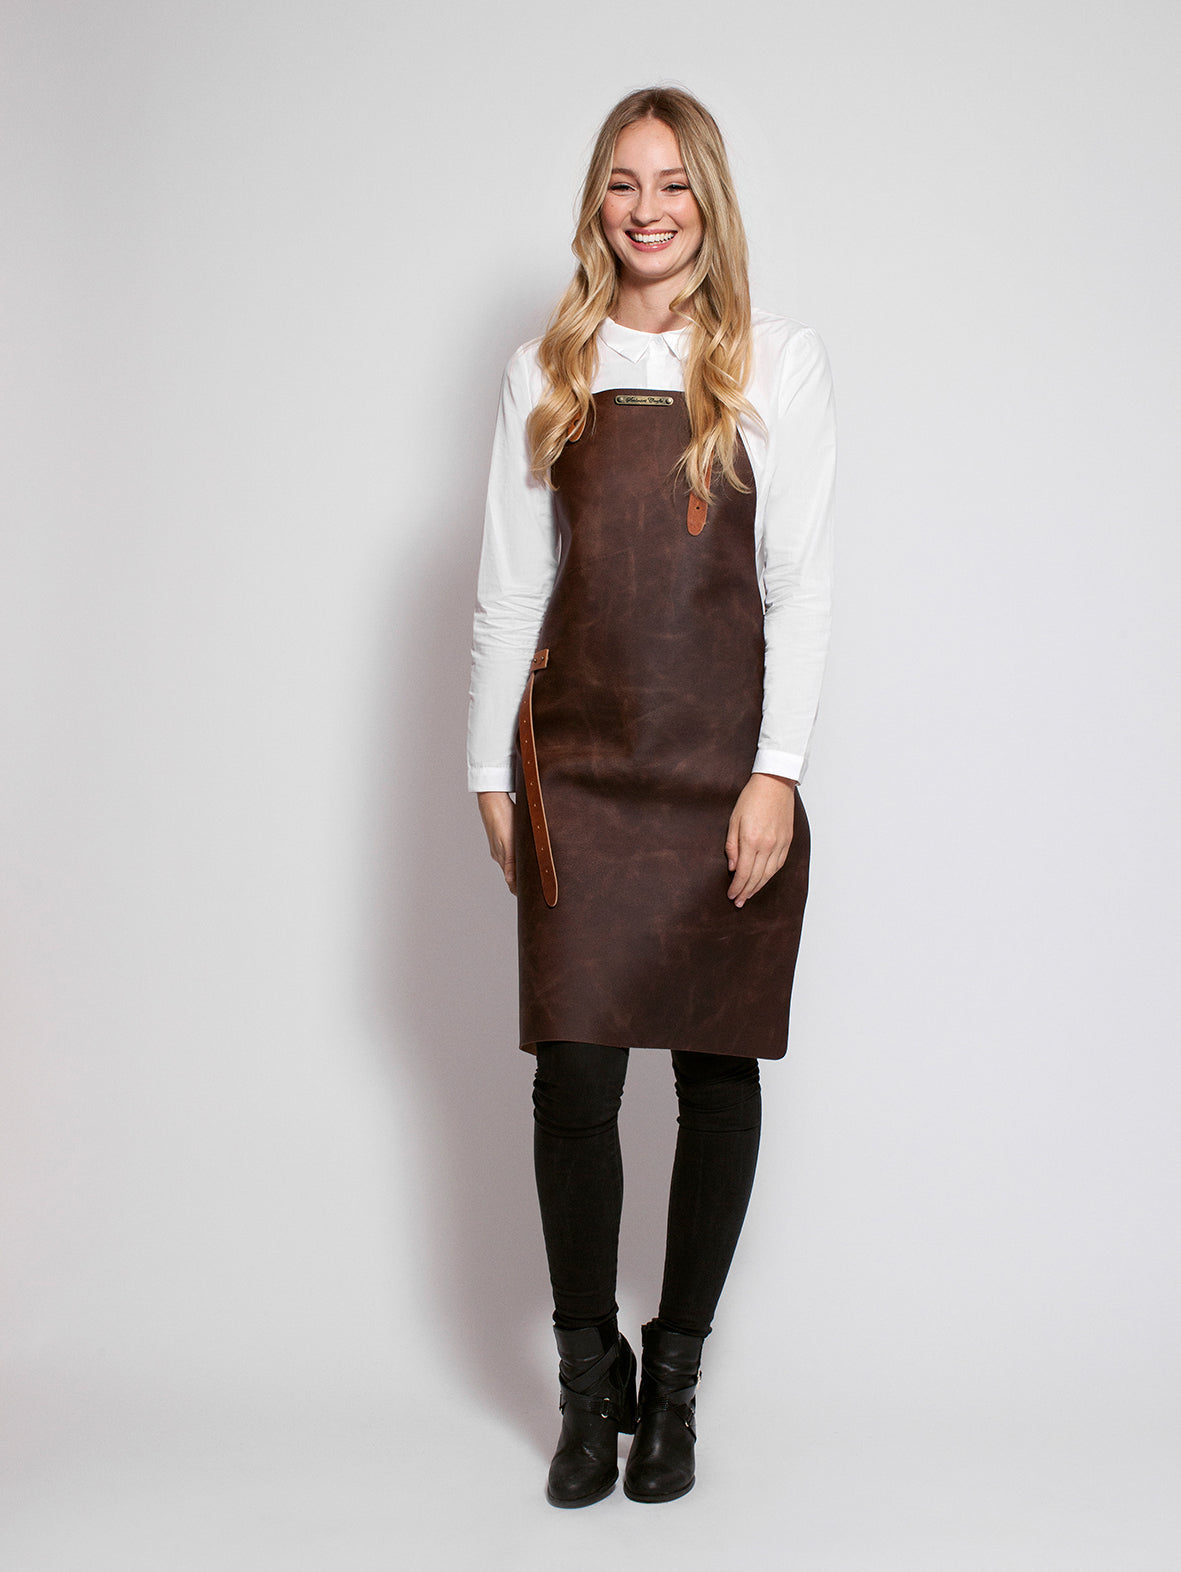 Leather Apron Basic Brown by STW -  ChefsCotton